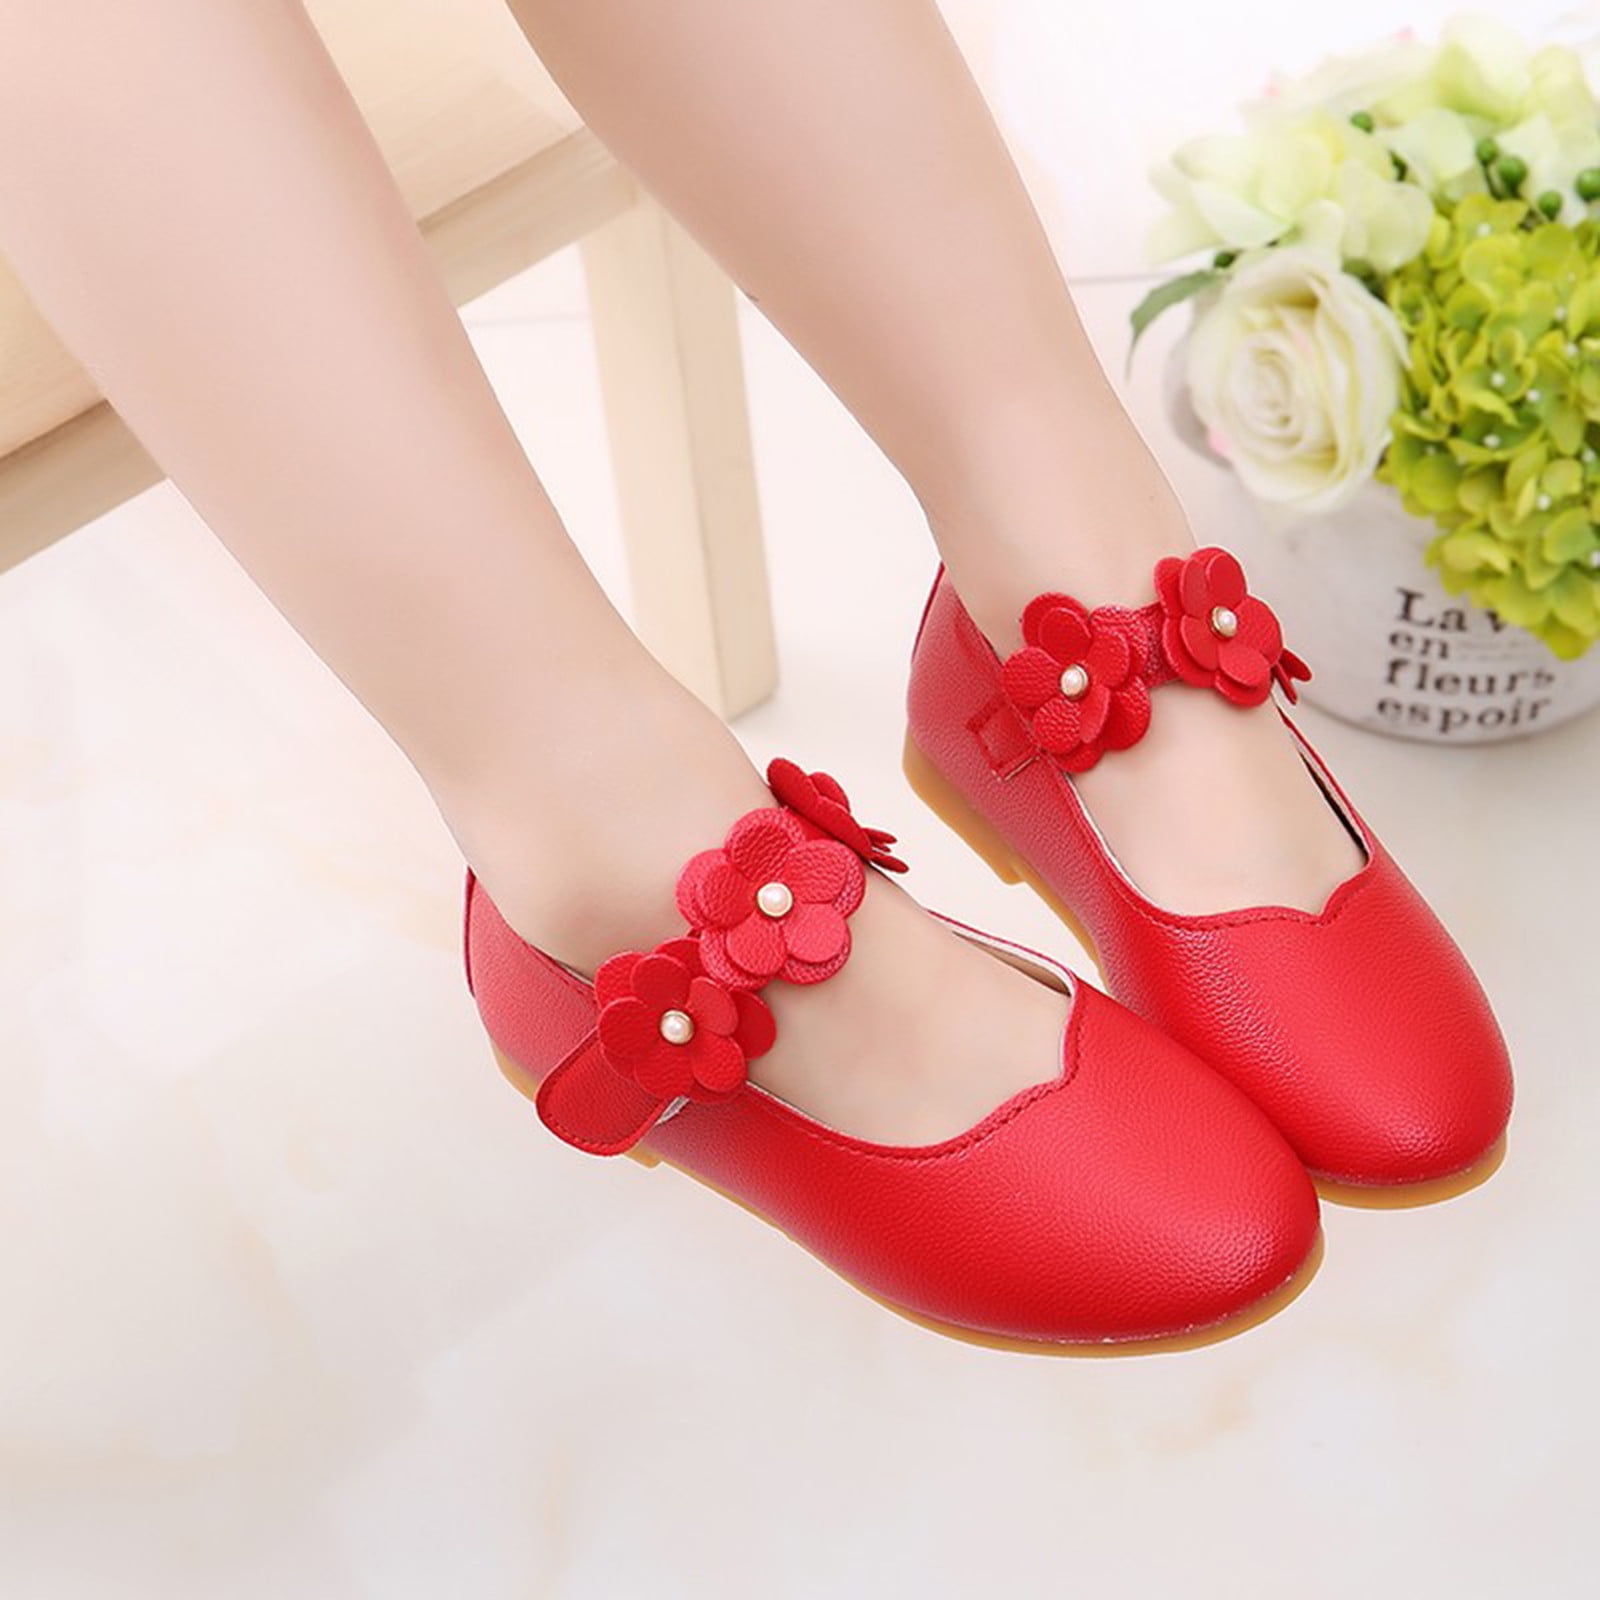 FIN86 Baby Girls Shoes Children Solid Bowknot Student Single Soft Dance Princess Shoes Single Shoes 